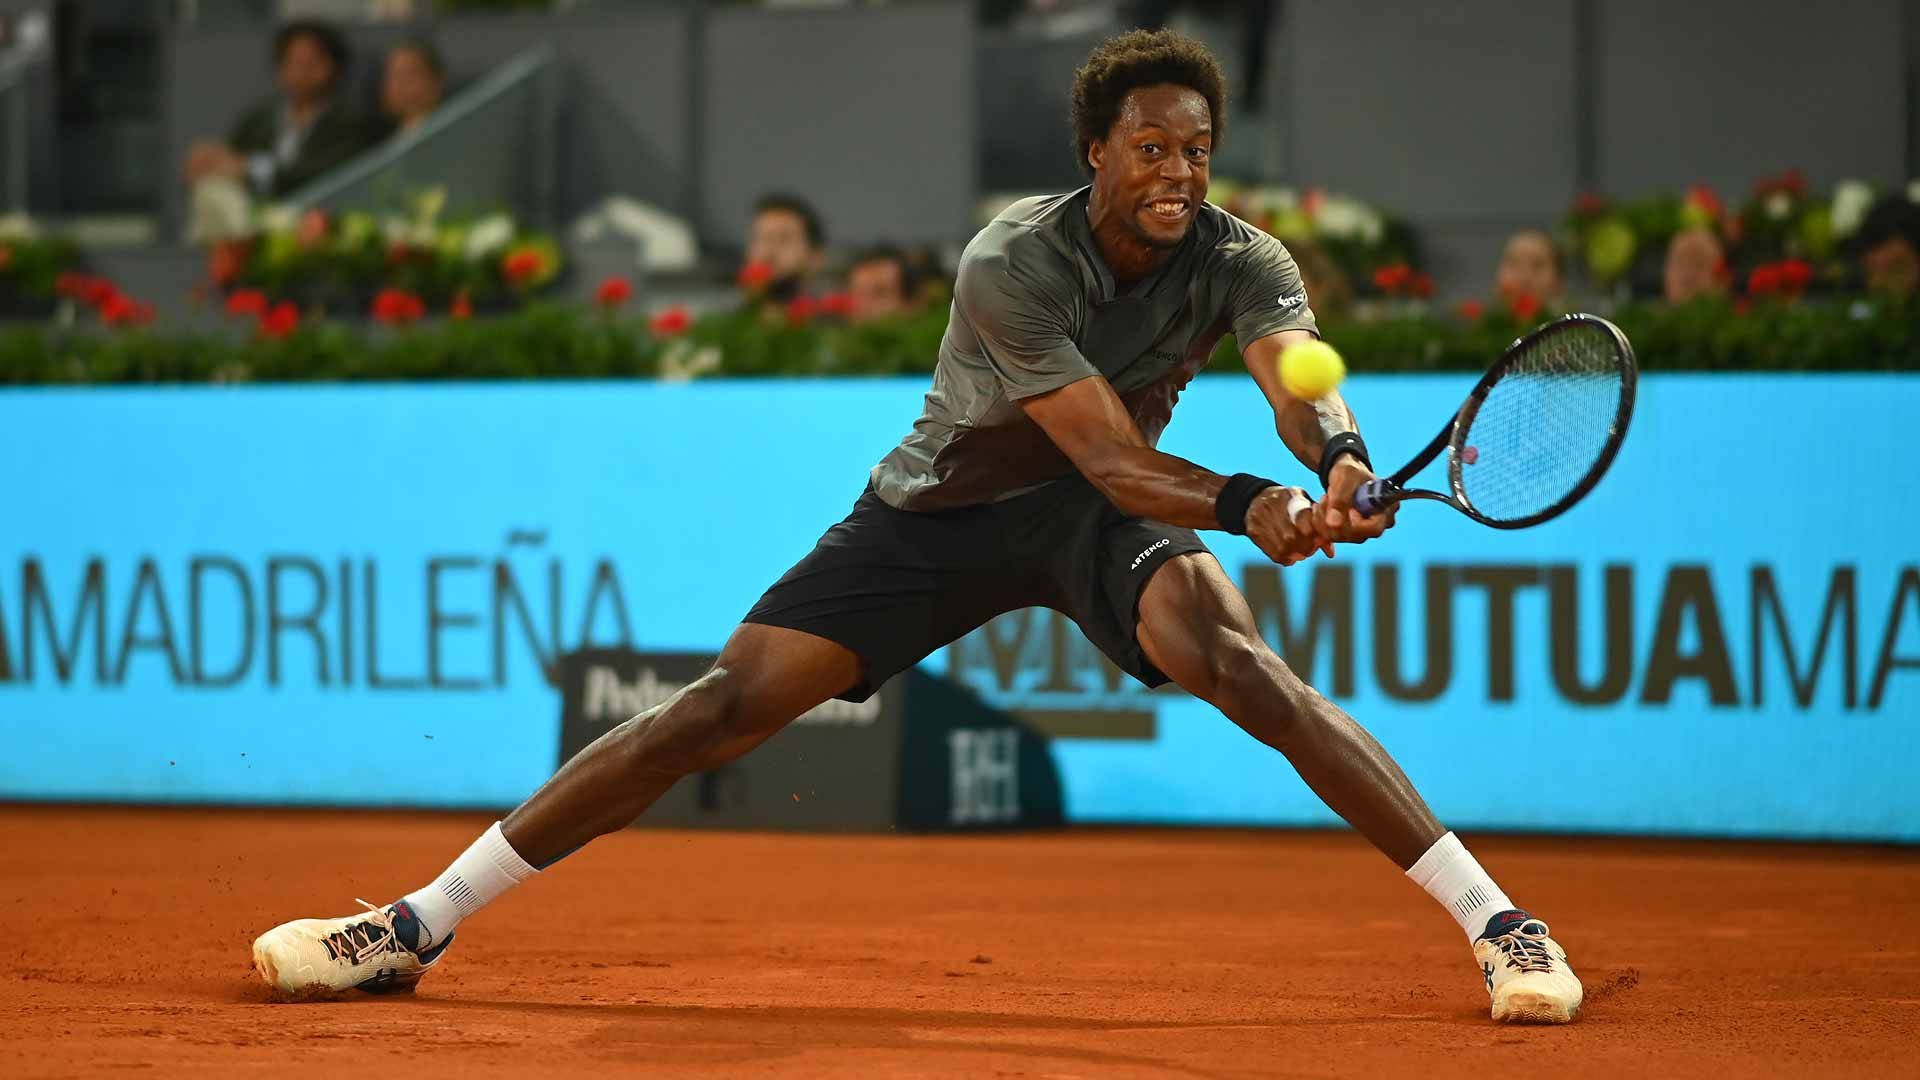 Didyou Mean To Have A Caption For A Computer Or Mobile Wallpaper Featuring Gael Monfils In Action On Court? Sfondo